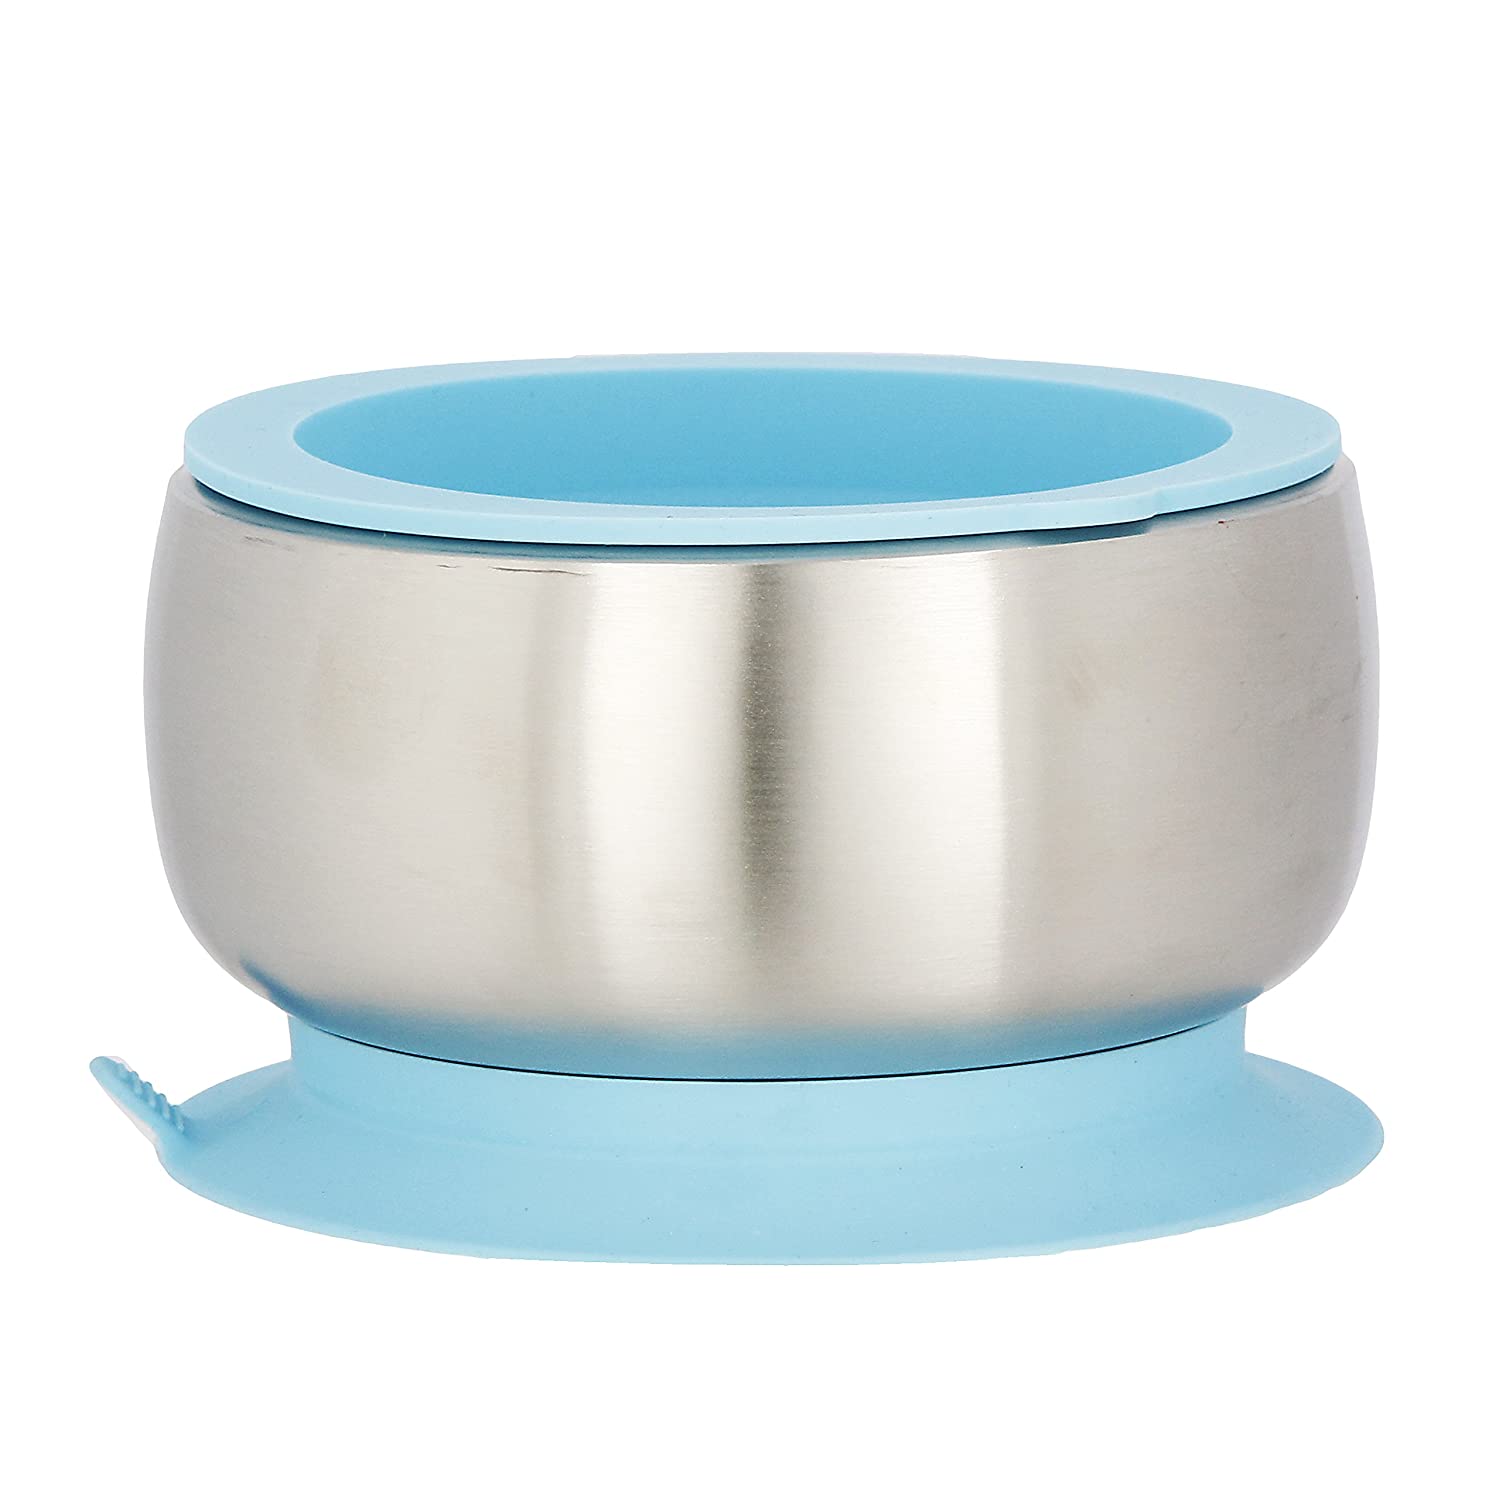 9 Best Baby Bowls and Plates 2022 - Buying Guide 6